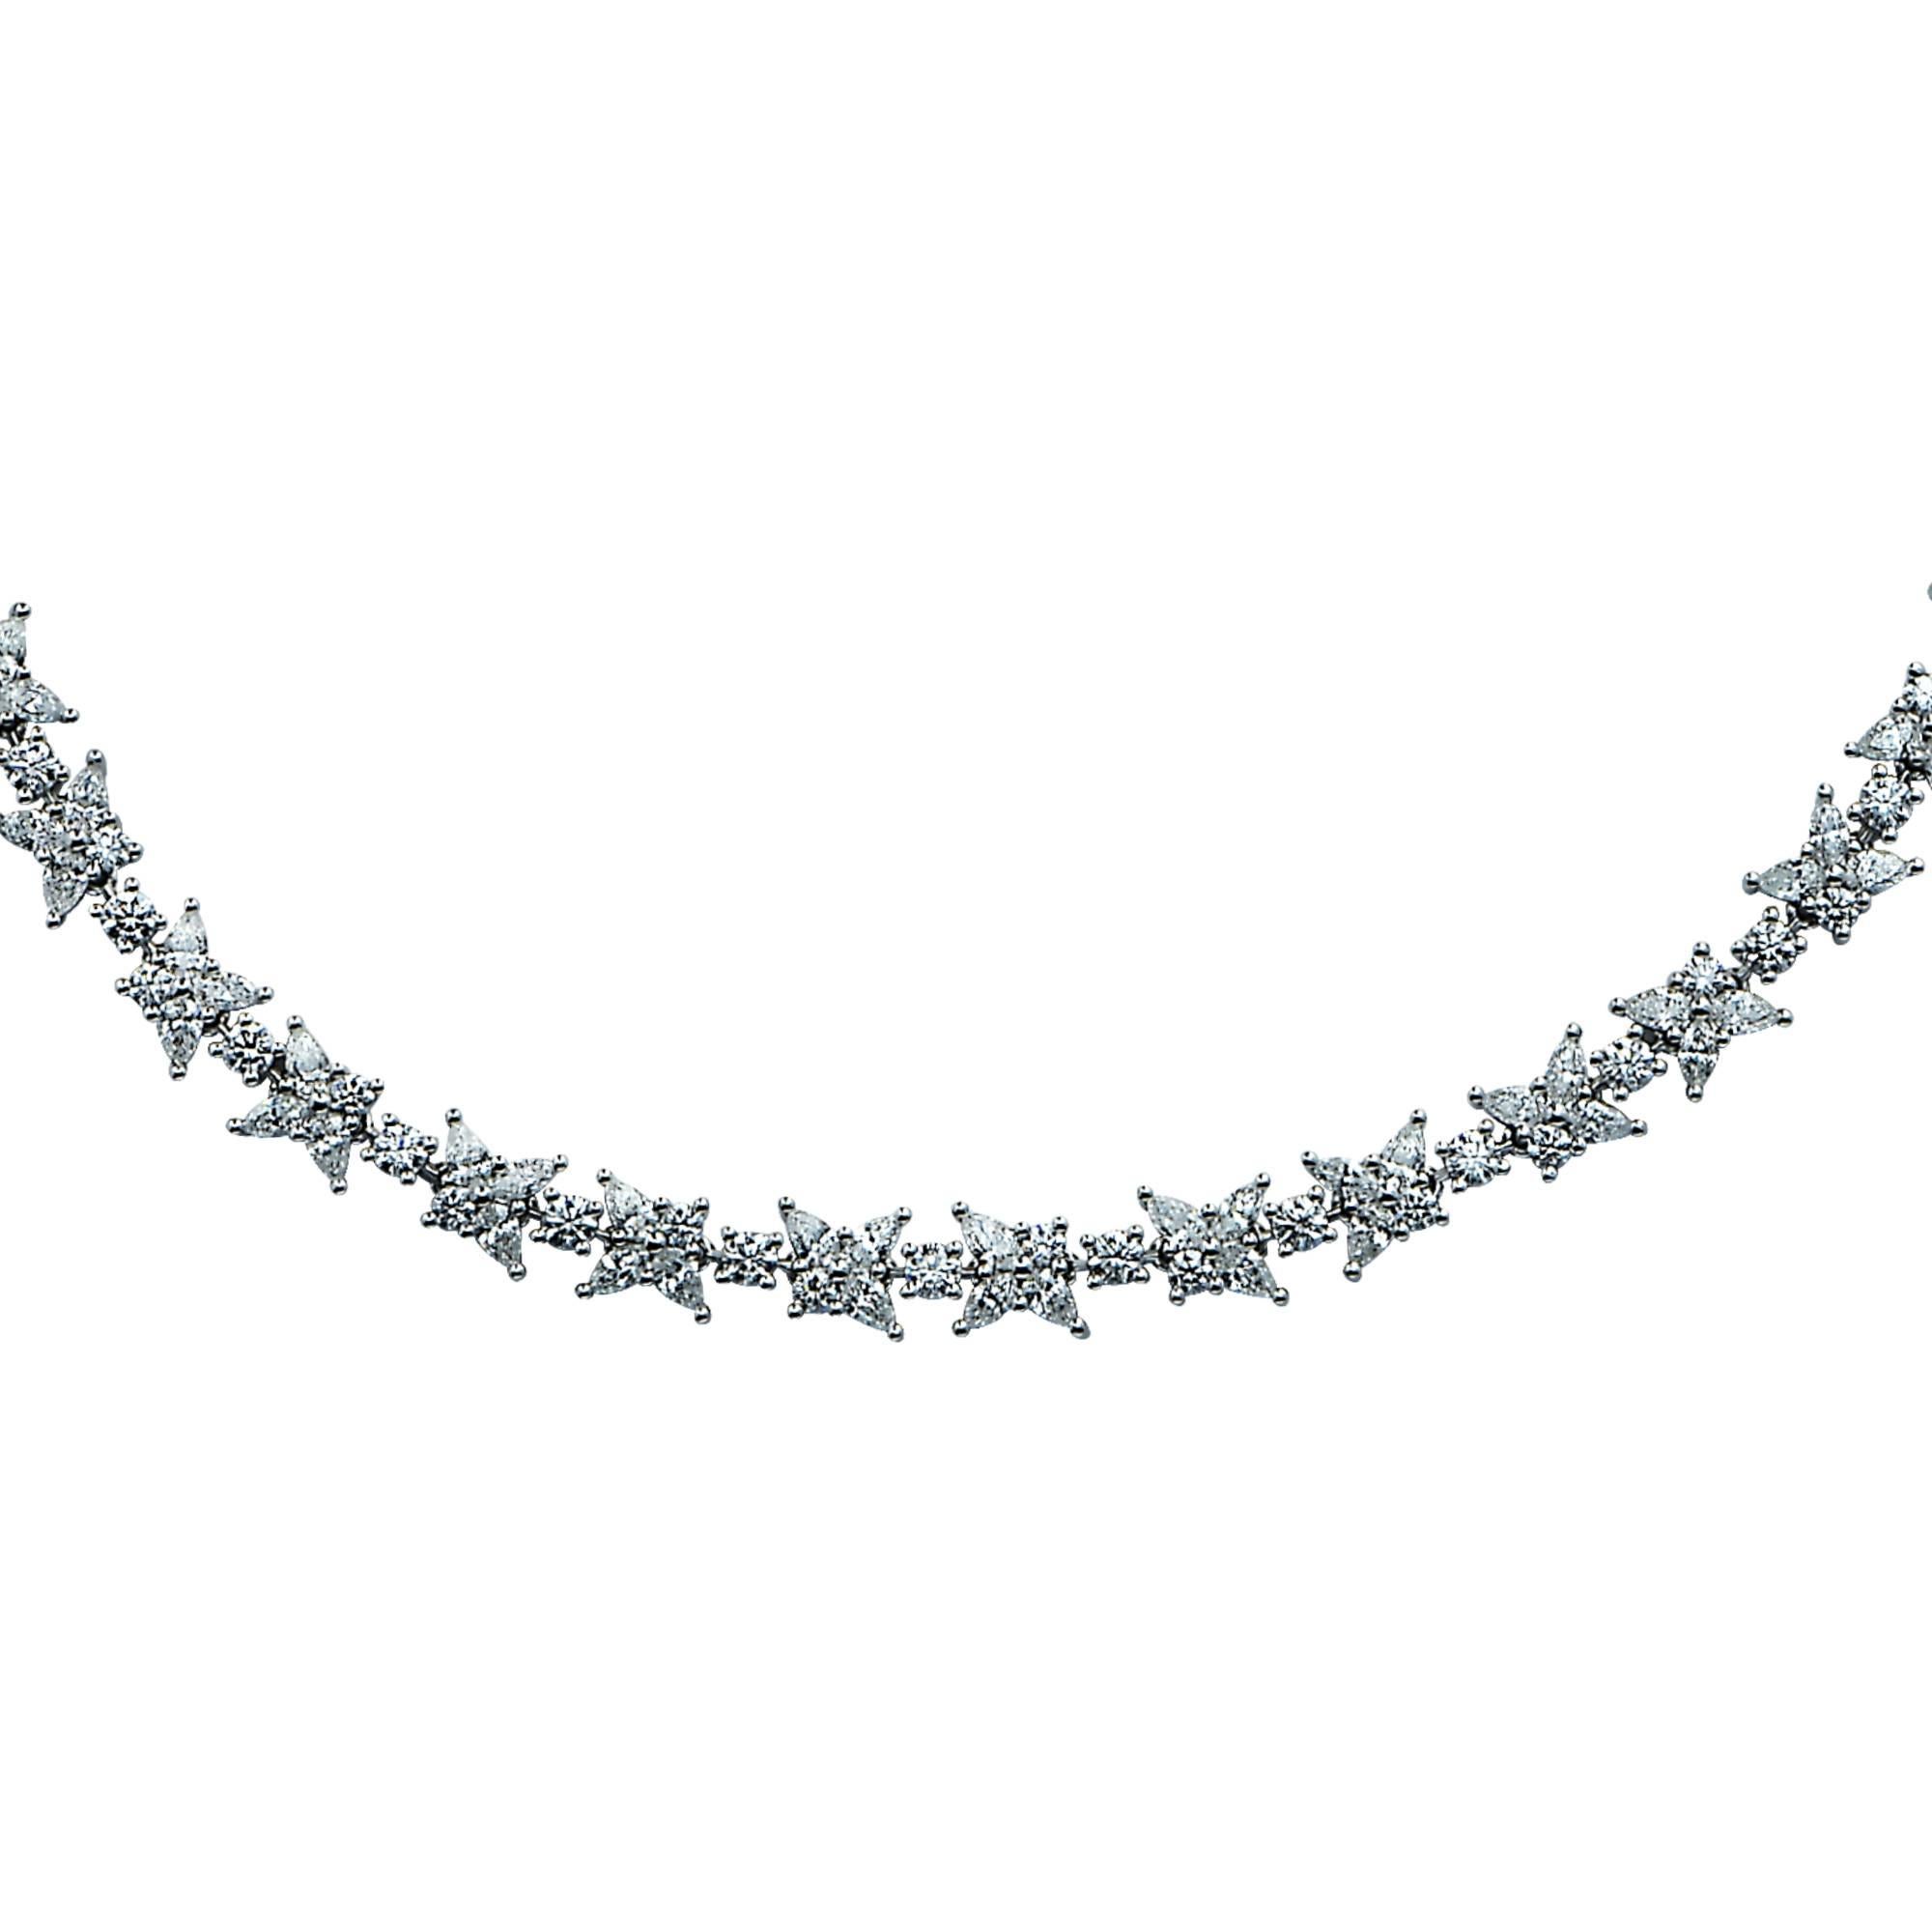 Distinctive Tiffany & Co. diamond cluster necklace from the Victoria collection, featuring approximately 20cts of mixed cut diamonds, D-G color, VVS1-VS2 clarity. This gorgeous necklace measures 17 inches in length by .30 of an inch. Each cluster